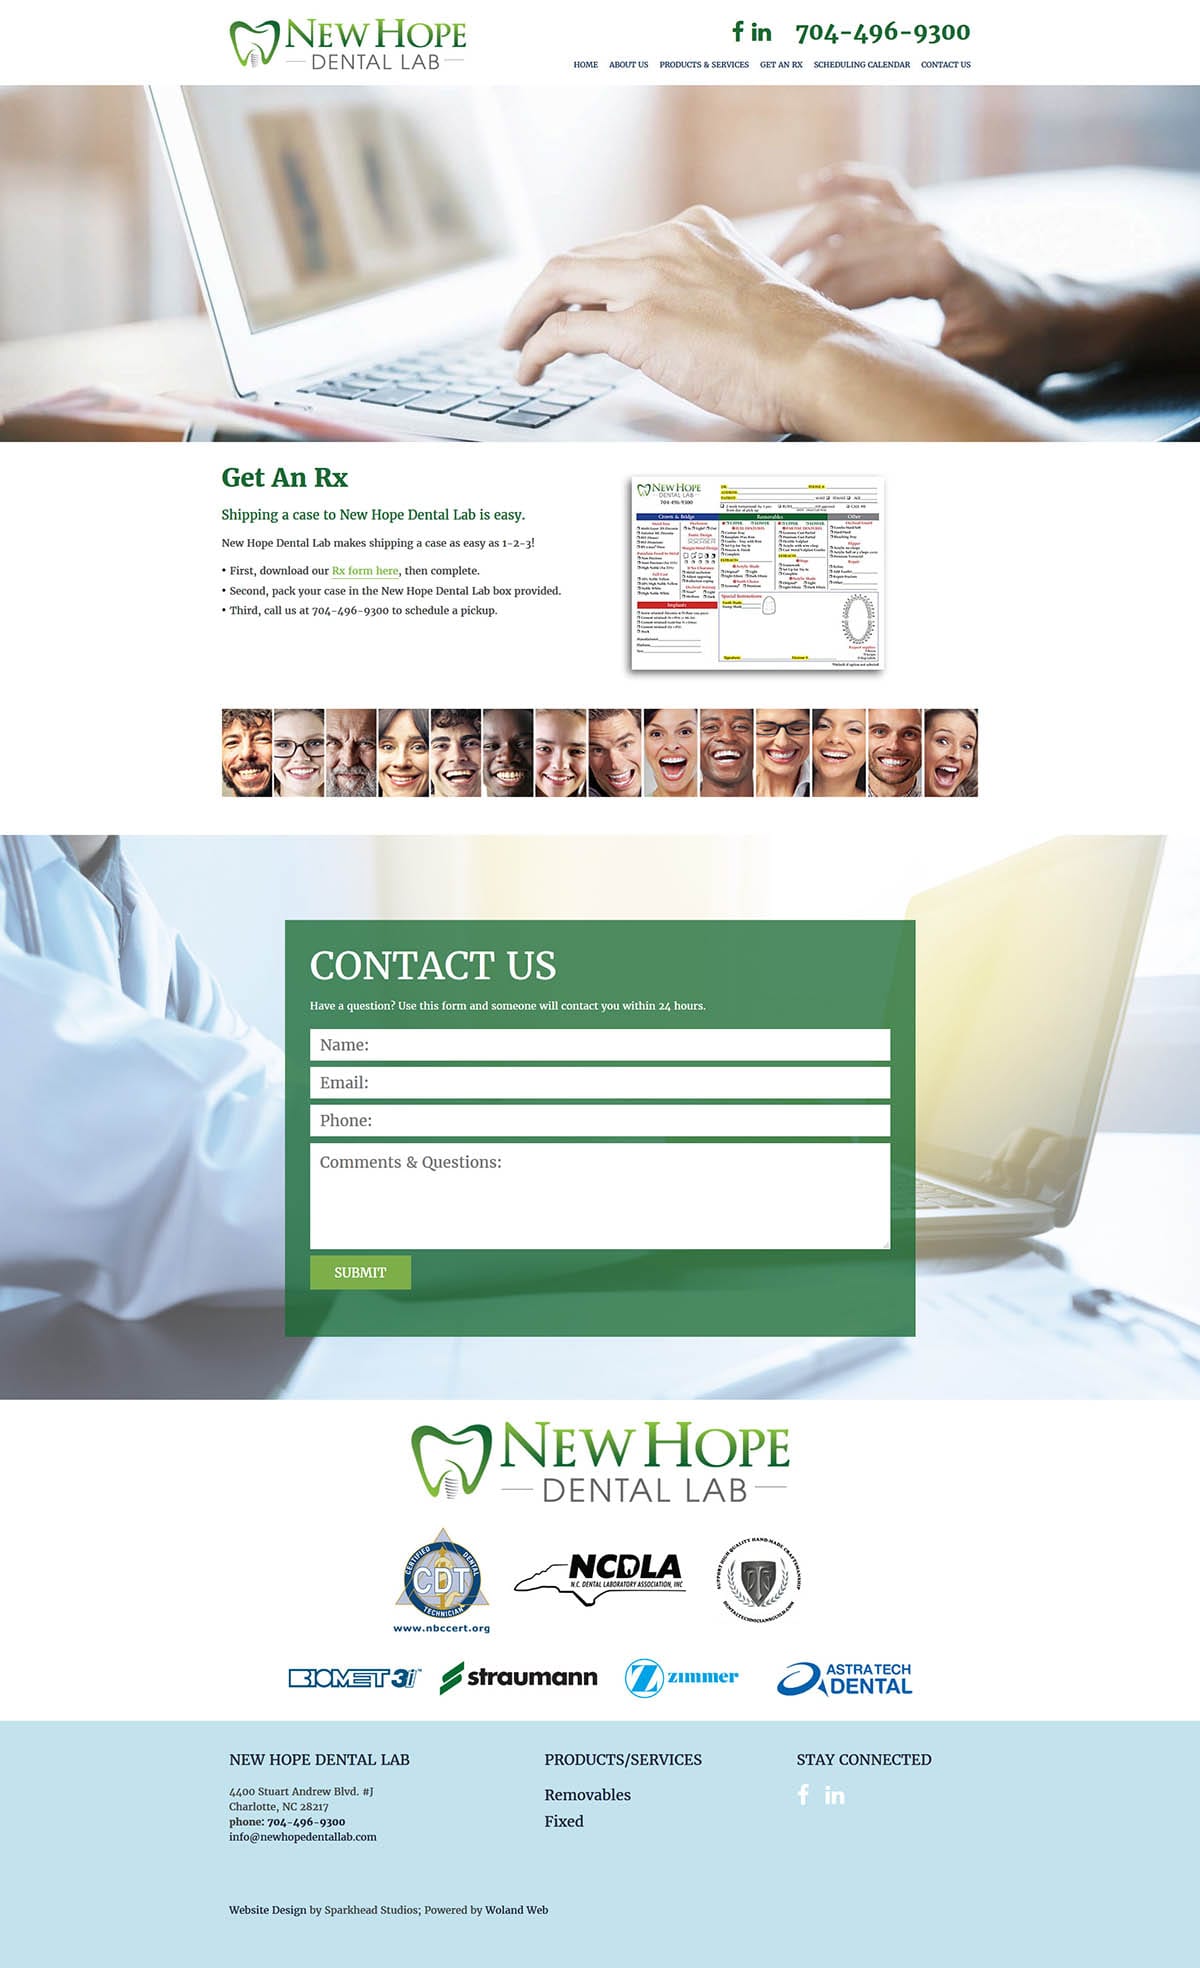 New Hope Dental Lab website contact page screenshot